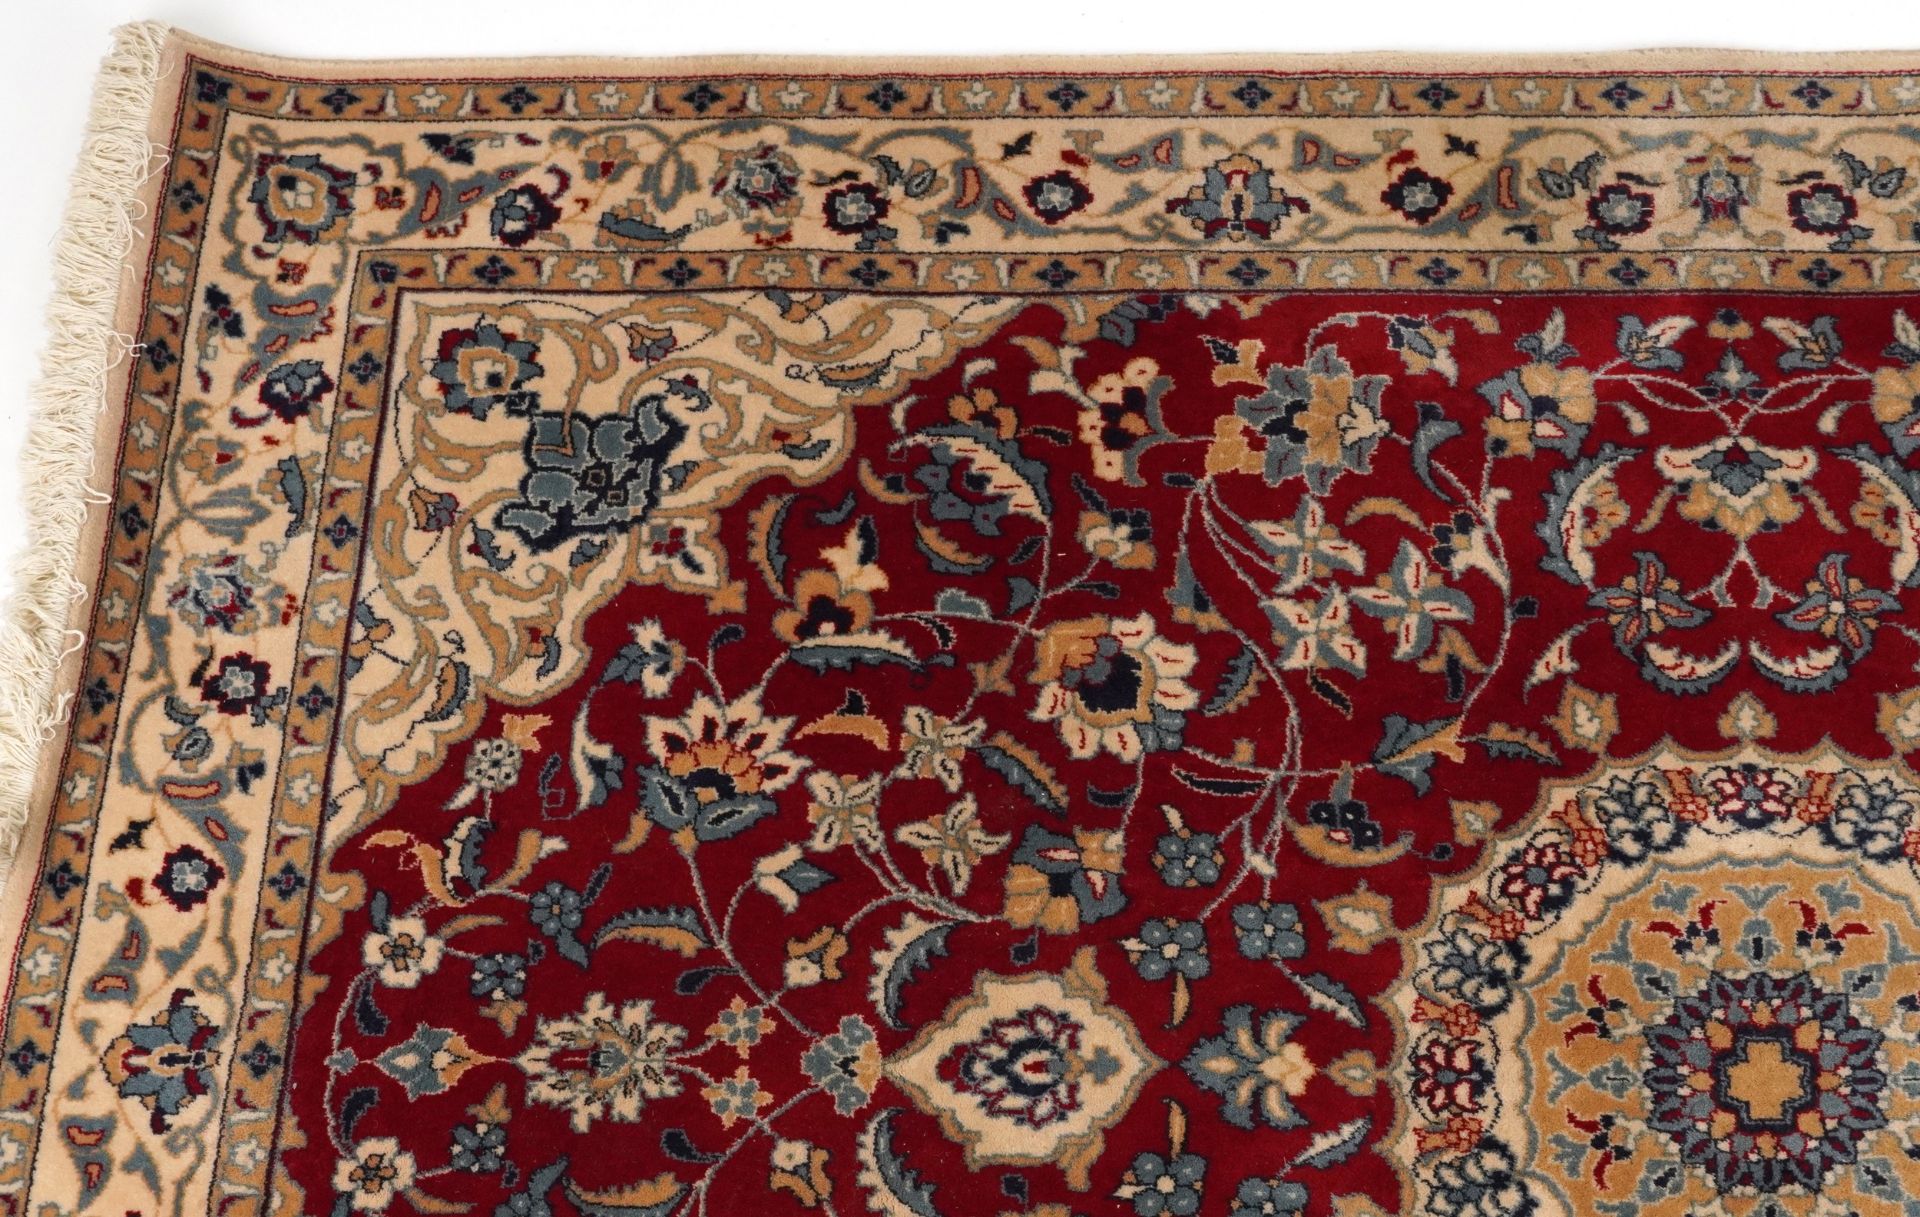 Rectangular Indian Rani rug having an allover repeat floral design on the red and cream grounds, - Image 2 of 6